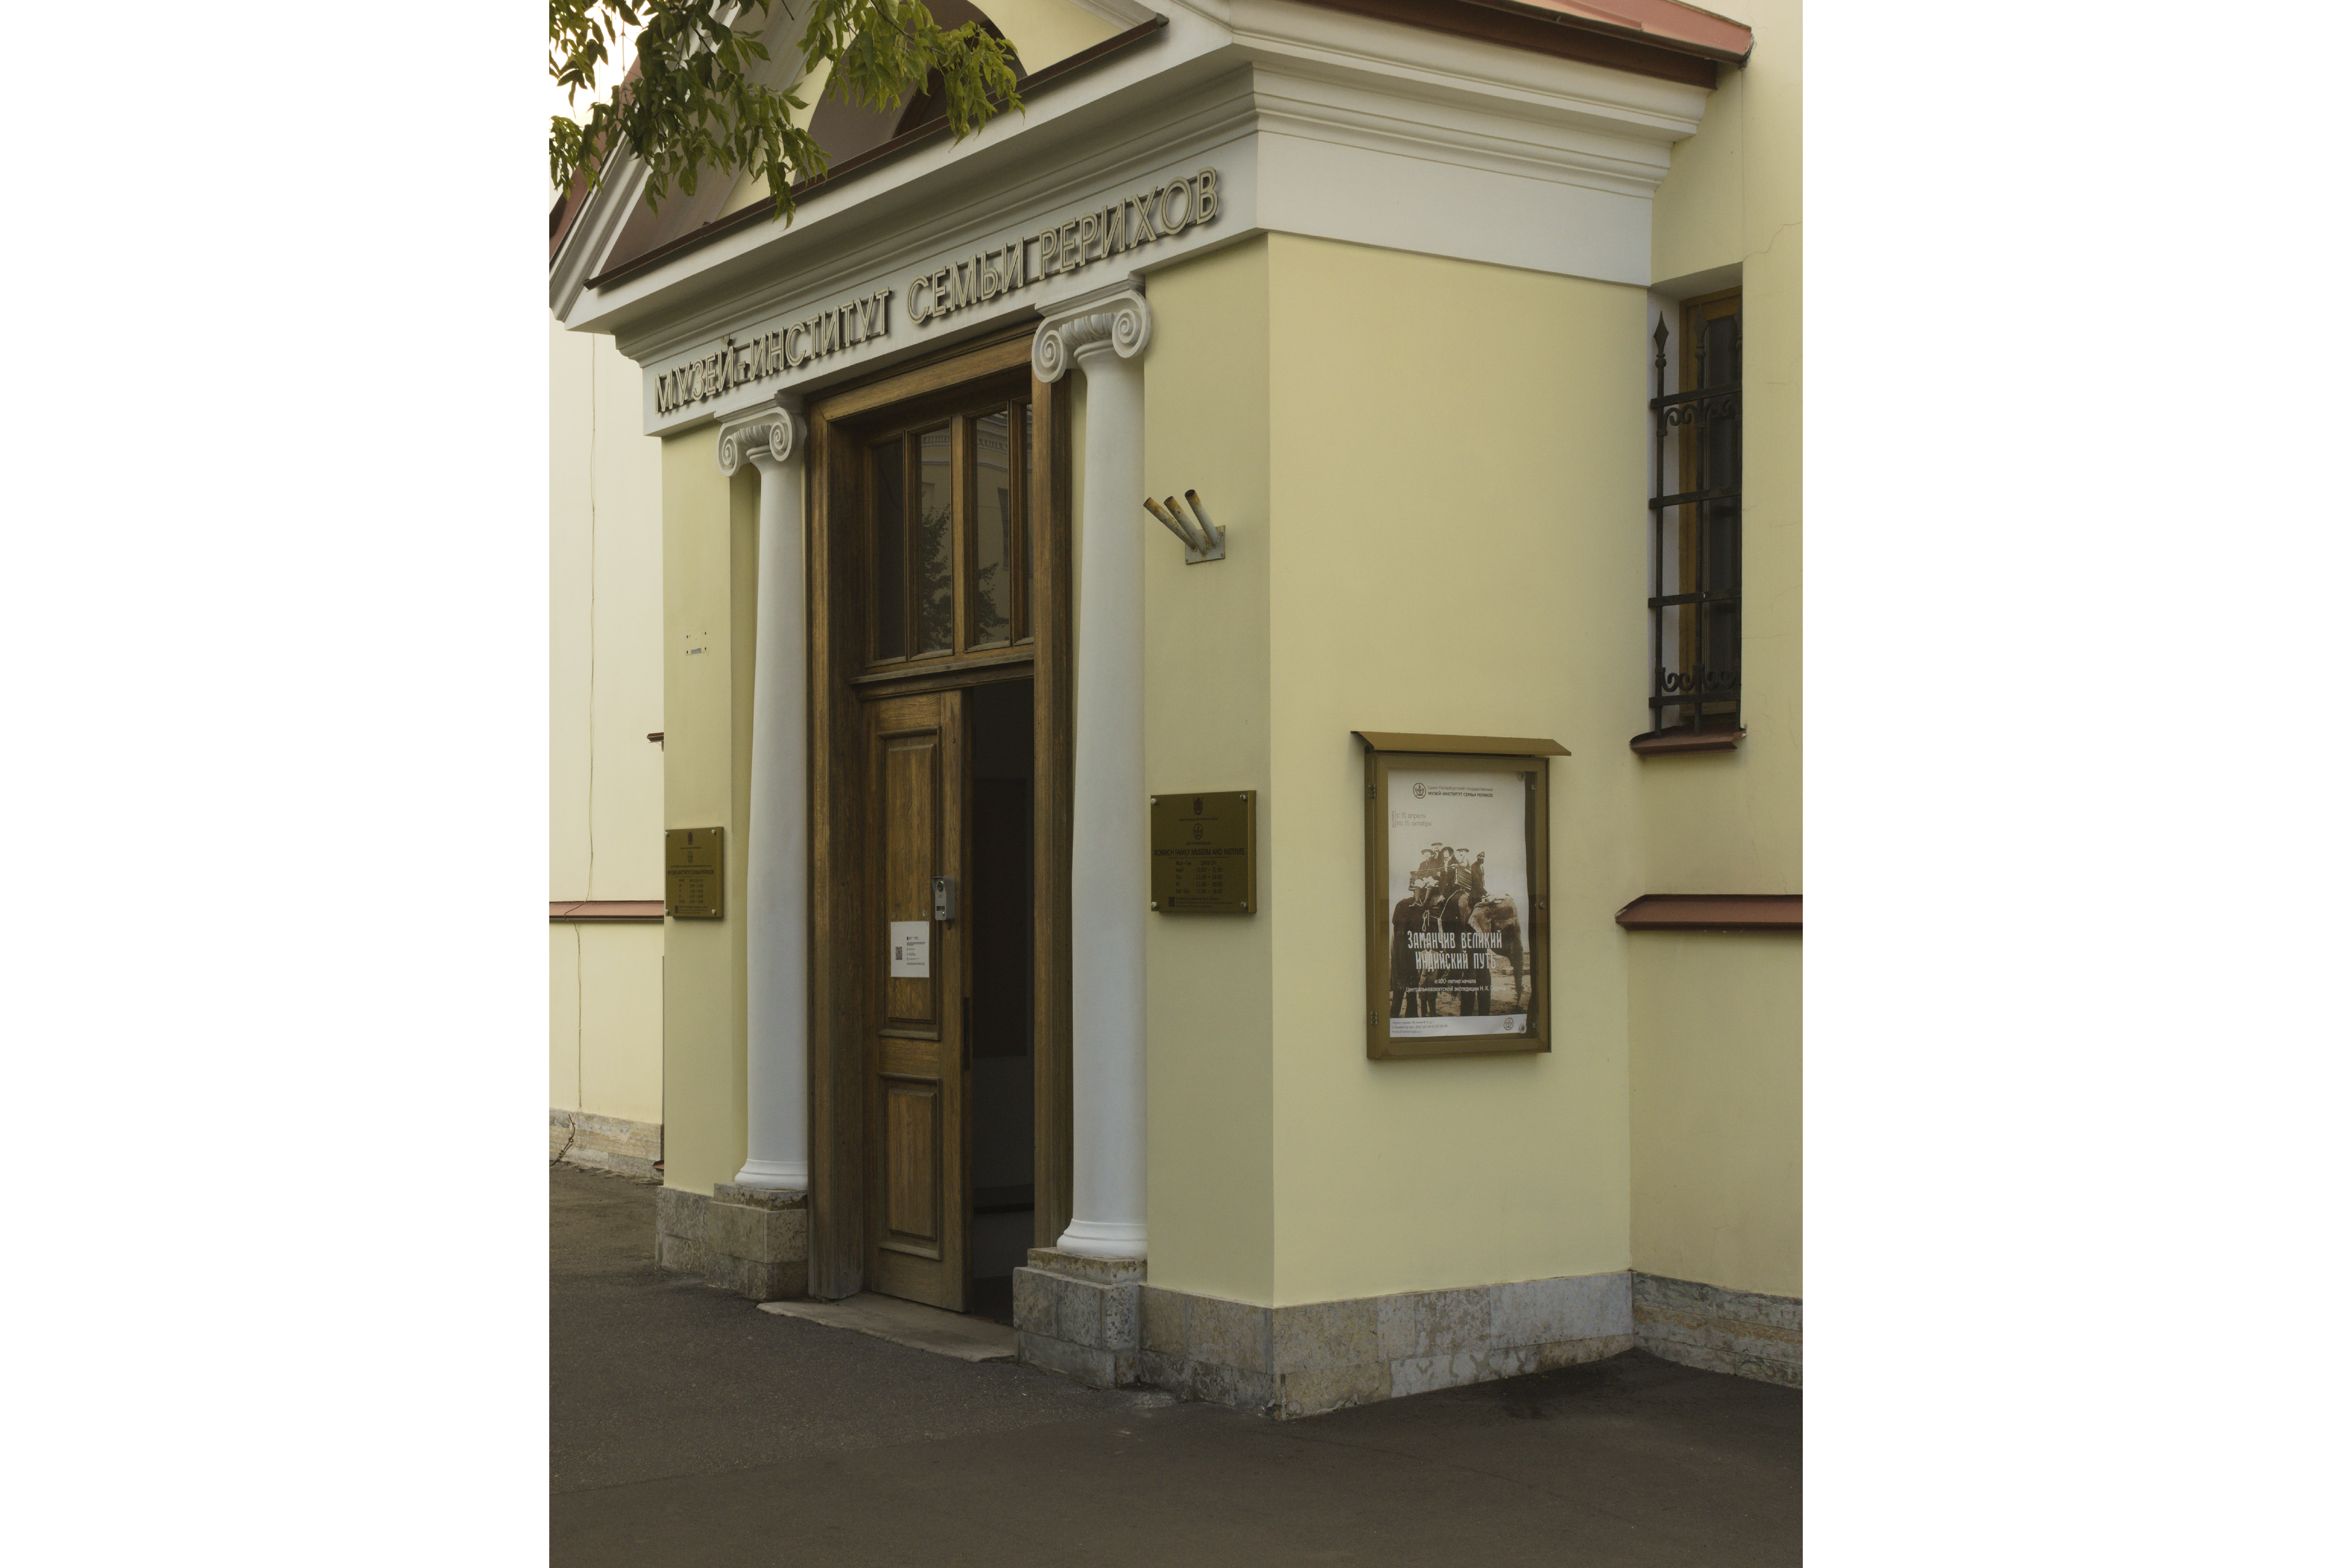 Roerich Family Museum and Institute